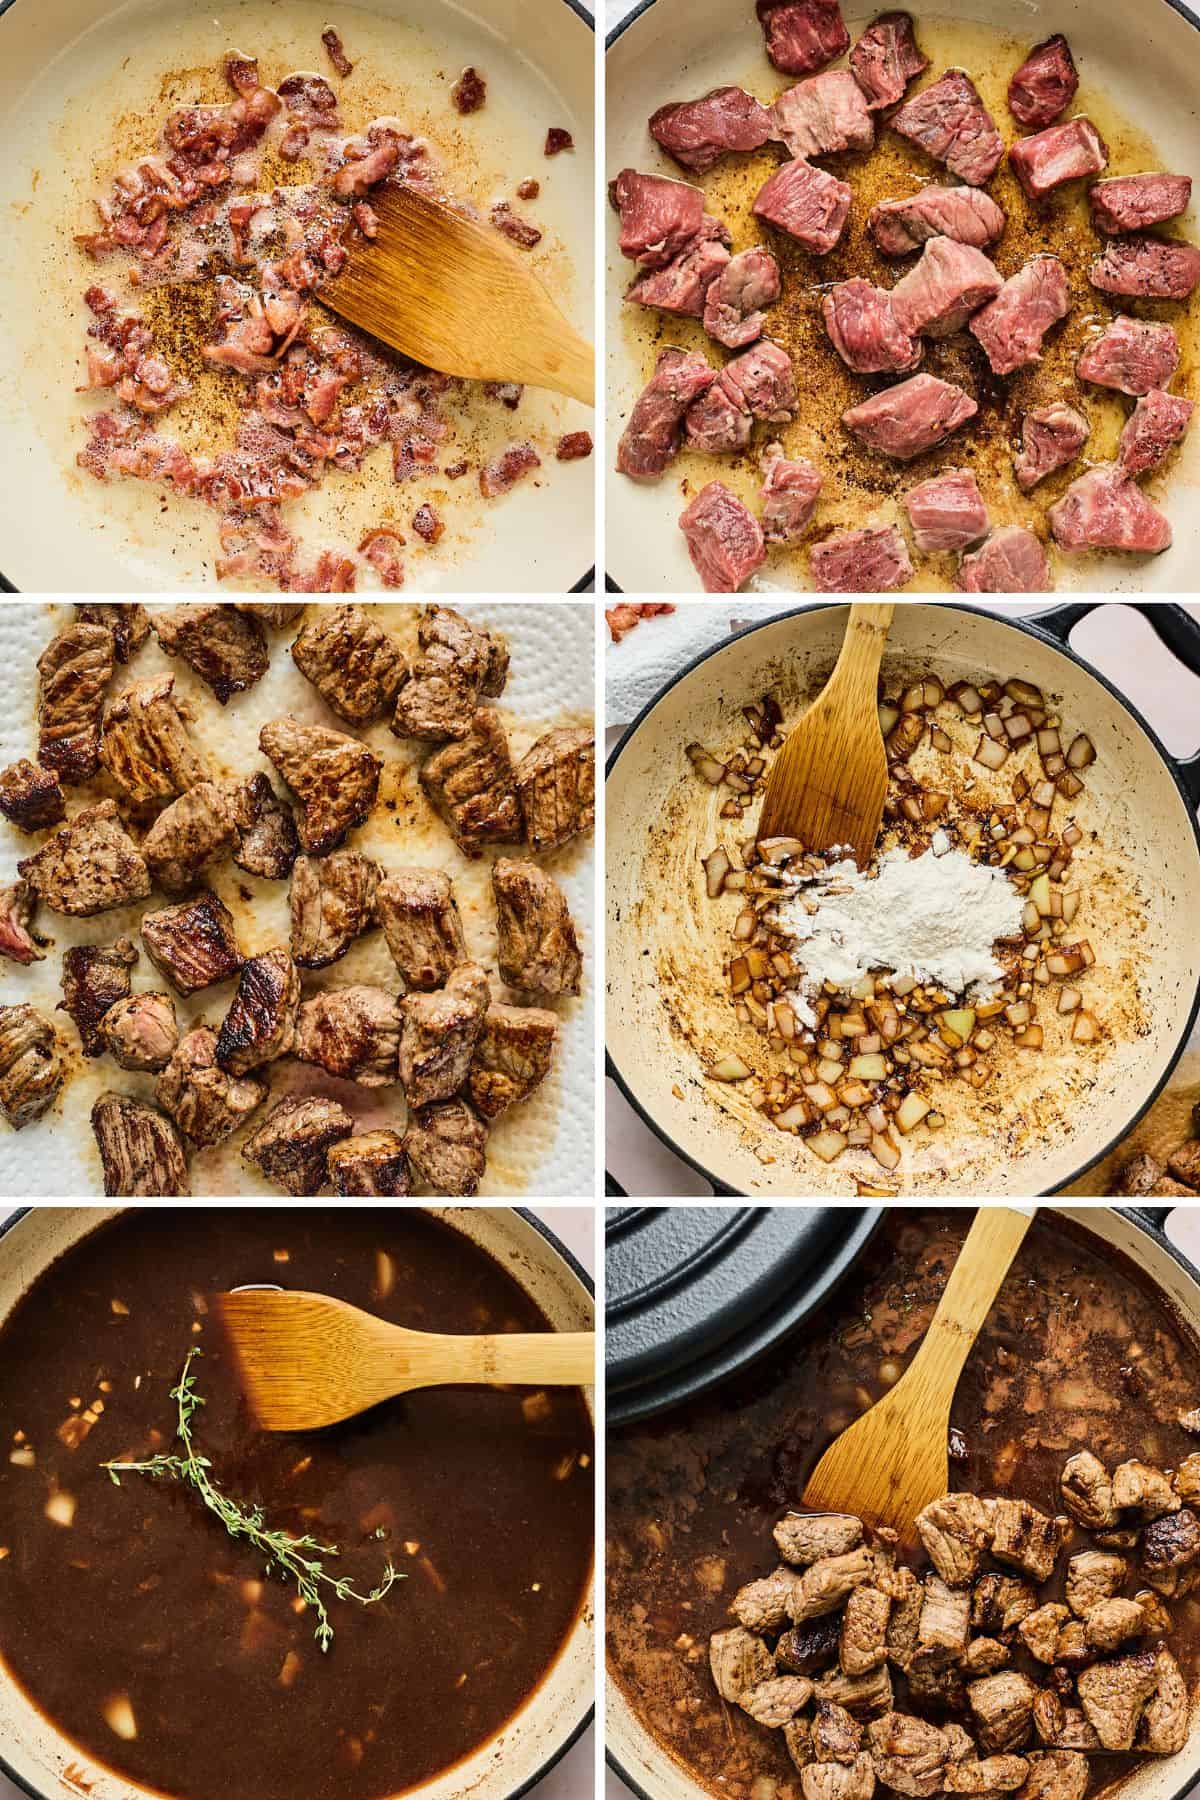 Steps to make beef tips with gravy